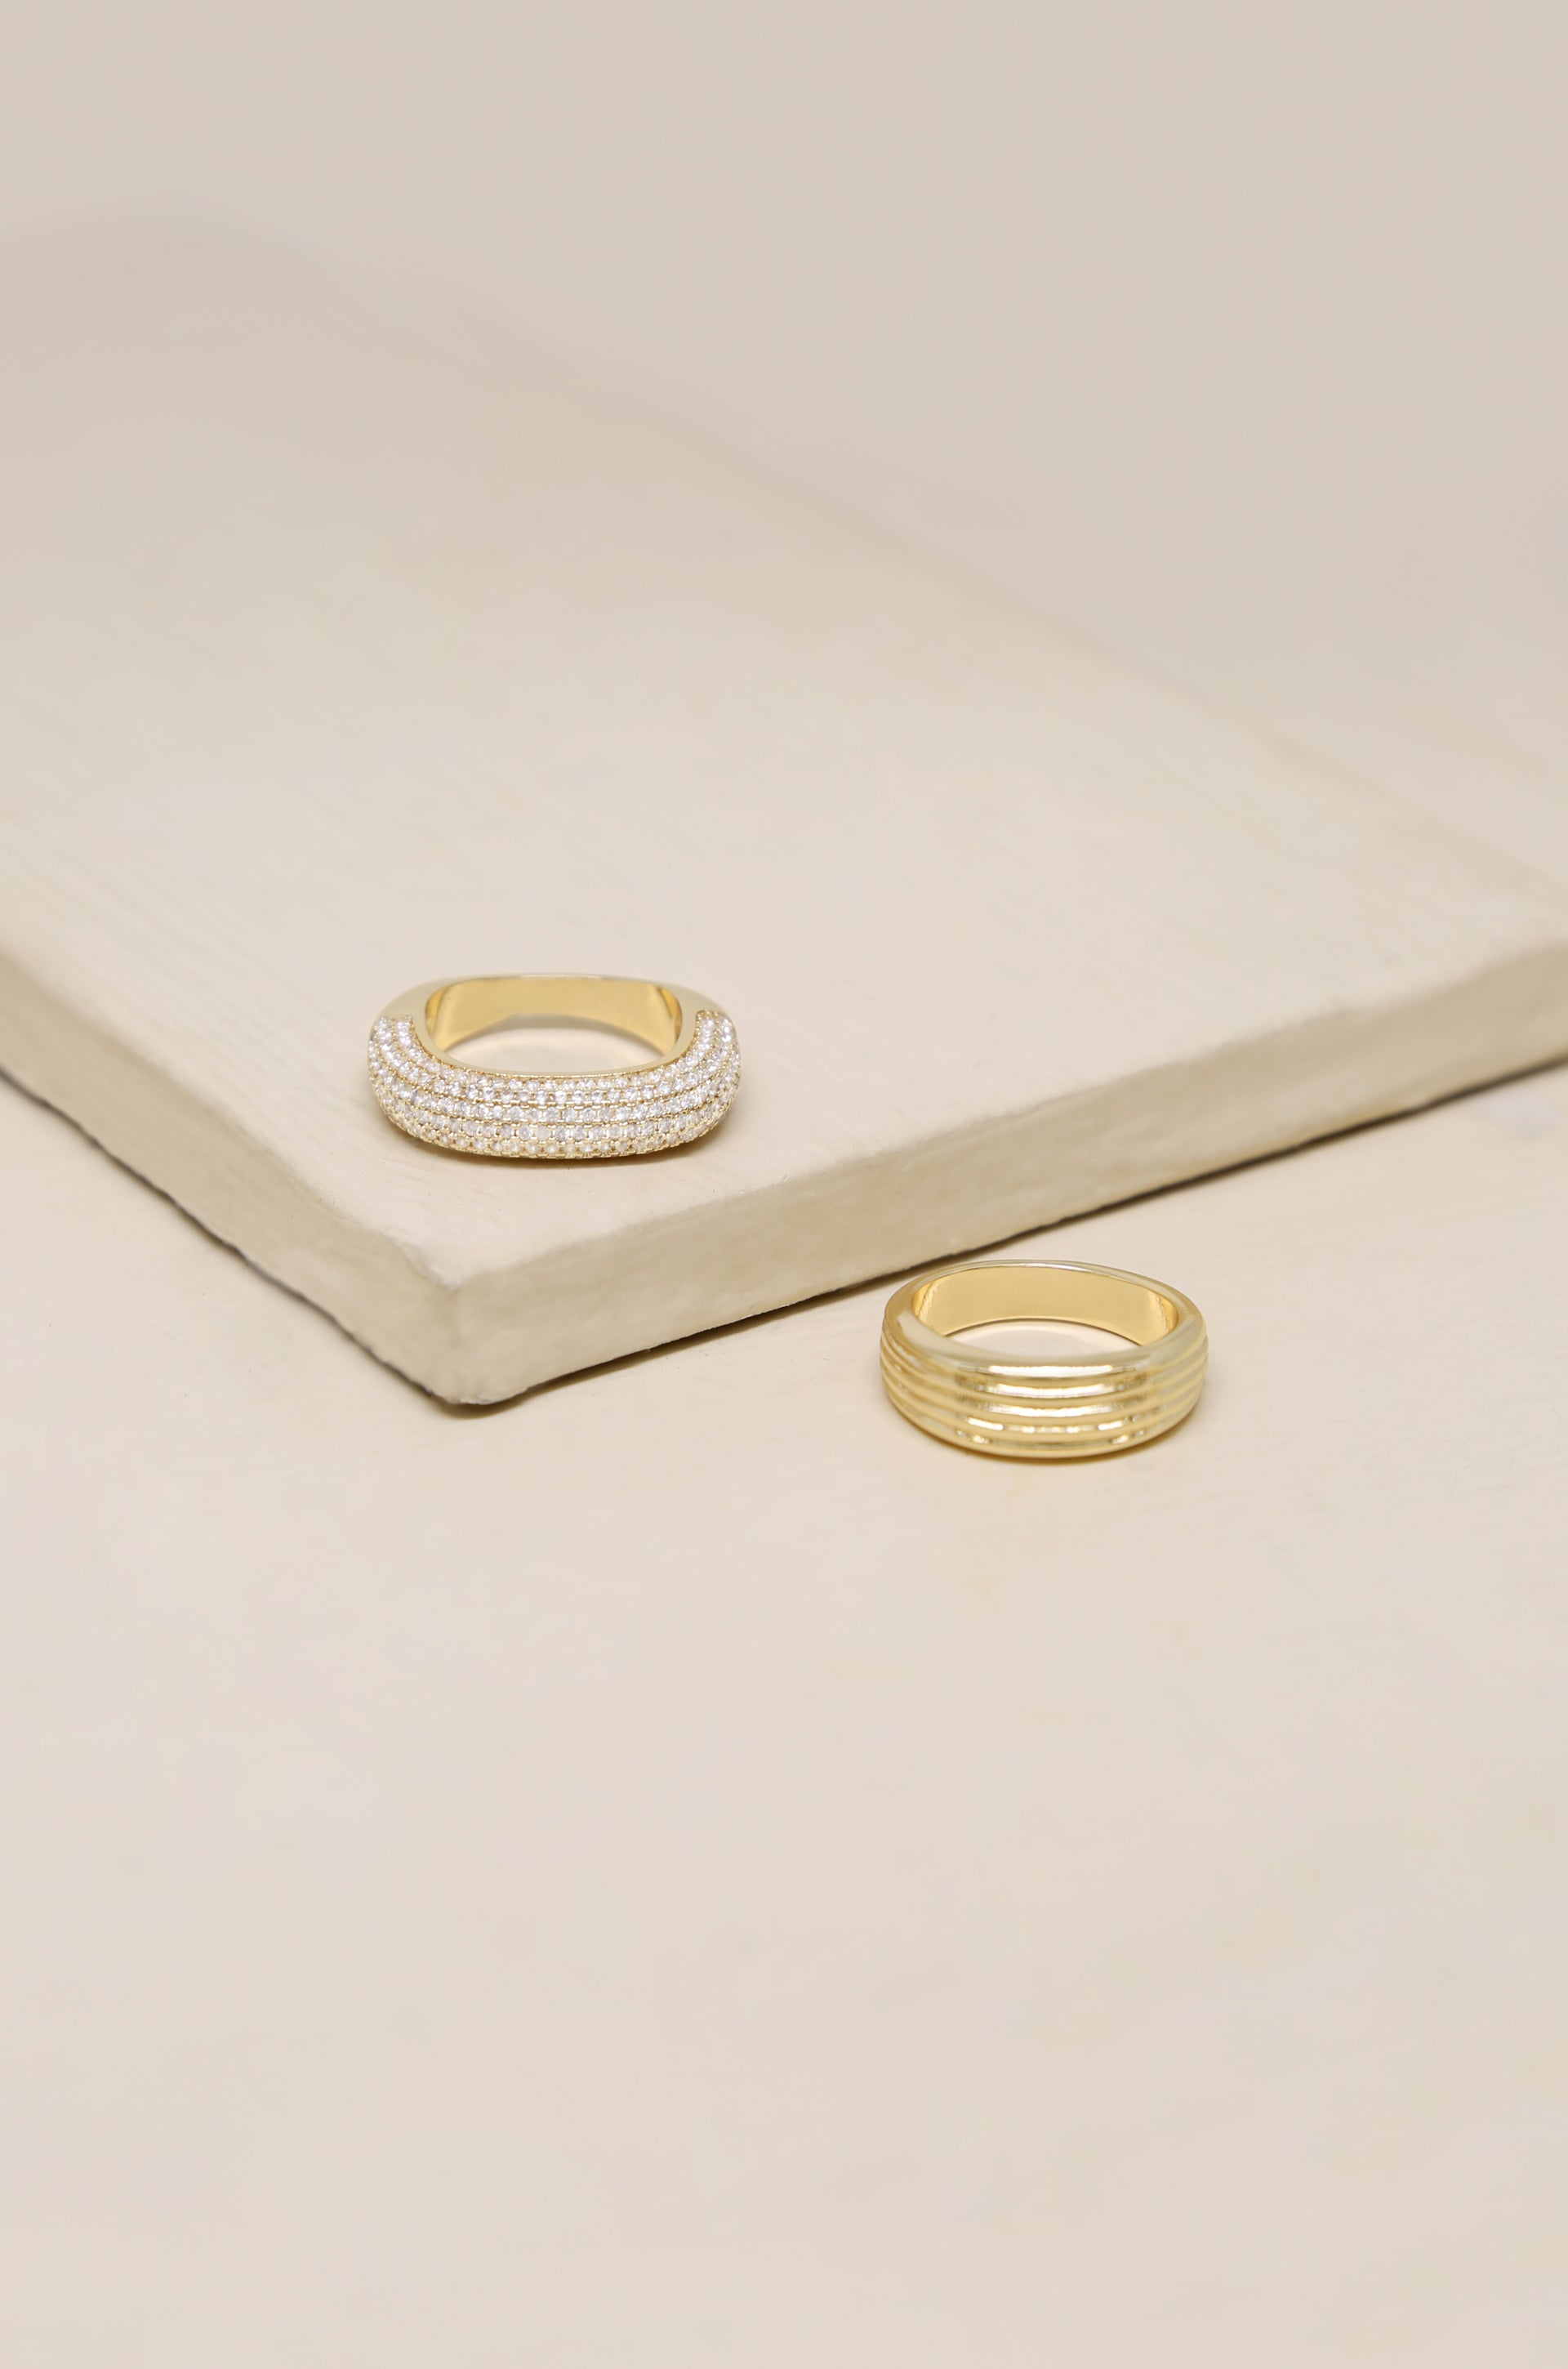 Thick Pave & Textured 18k Gold Plated Ring Band Set on slate background  